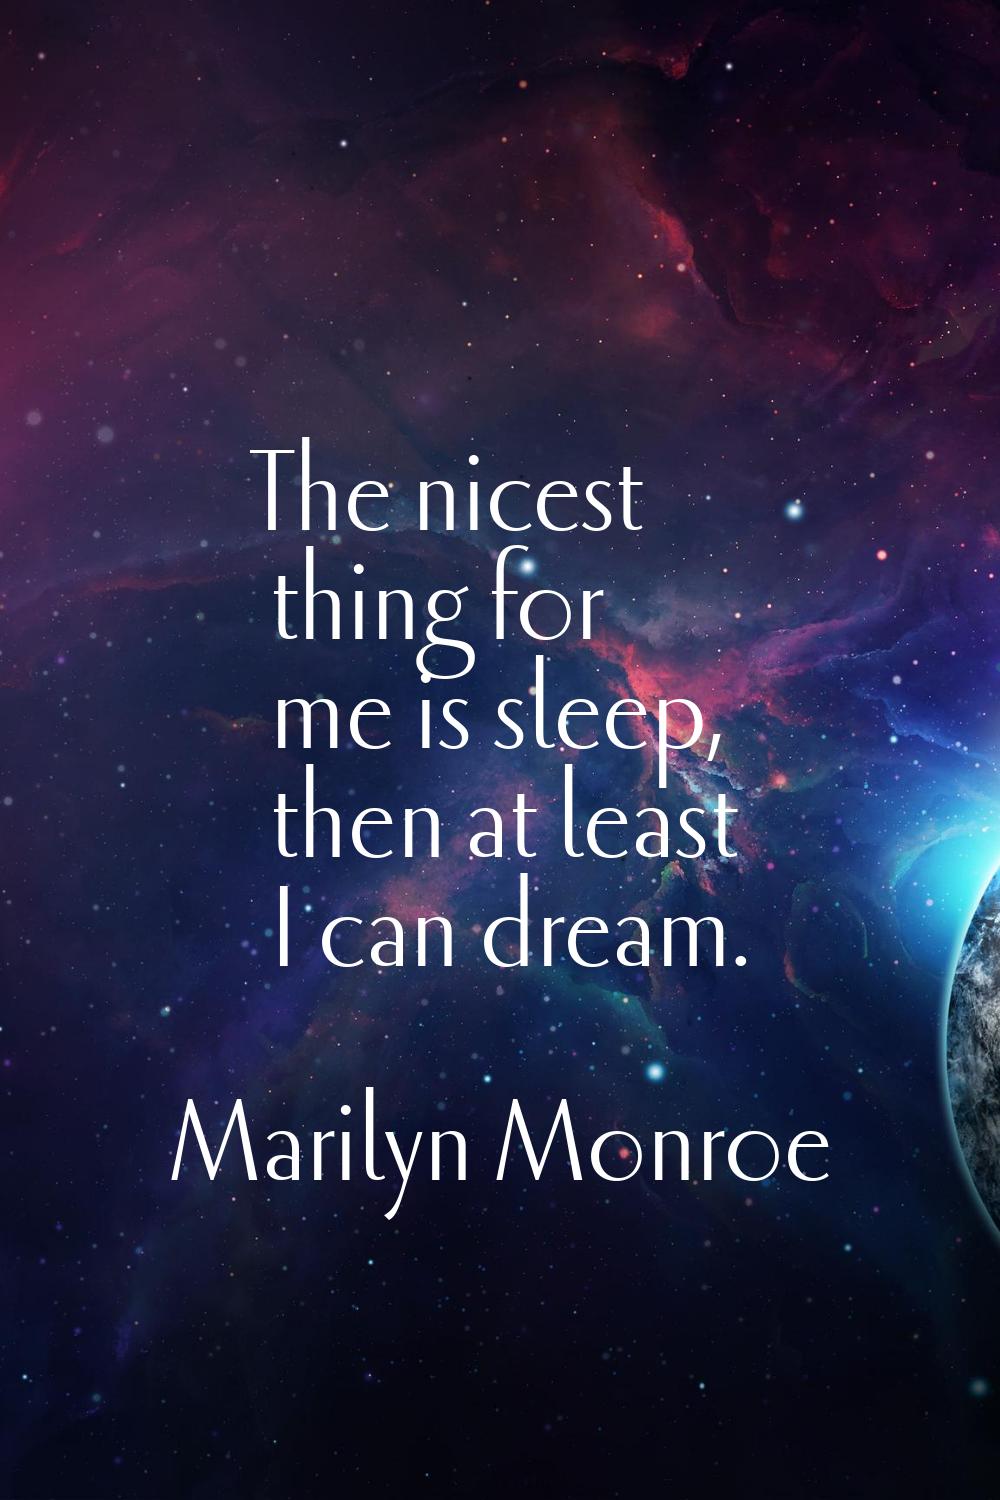 The nicest thing for me is sleep, then at least I can dream.